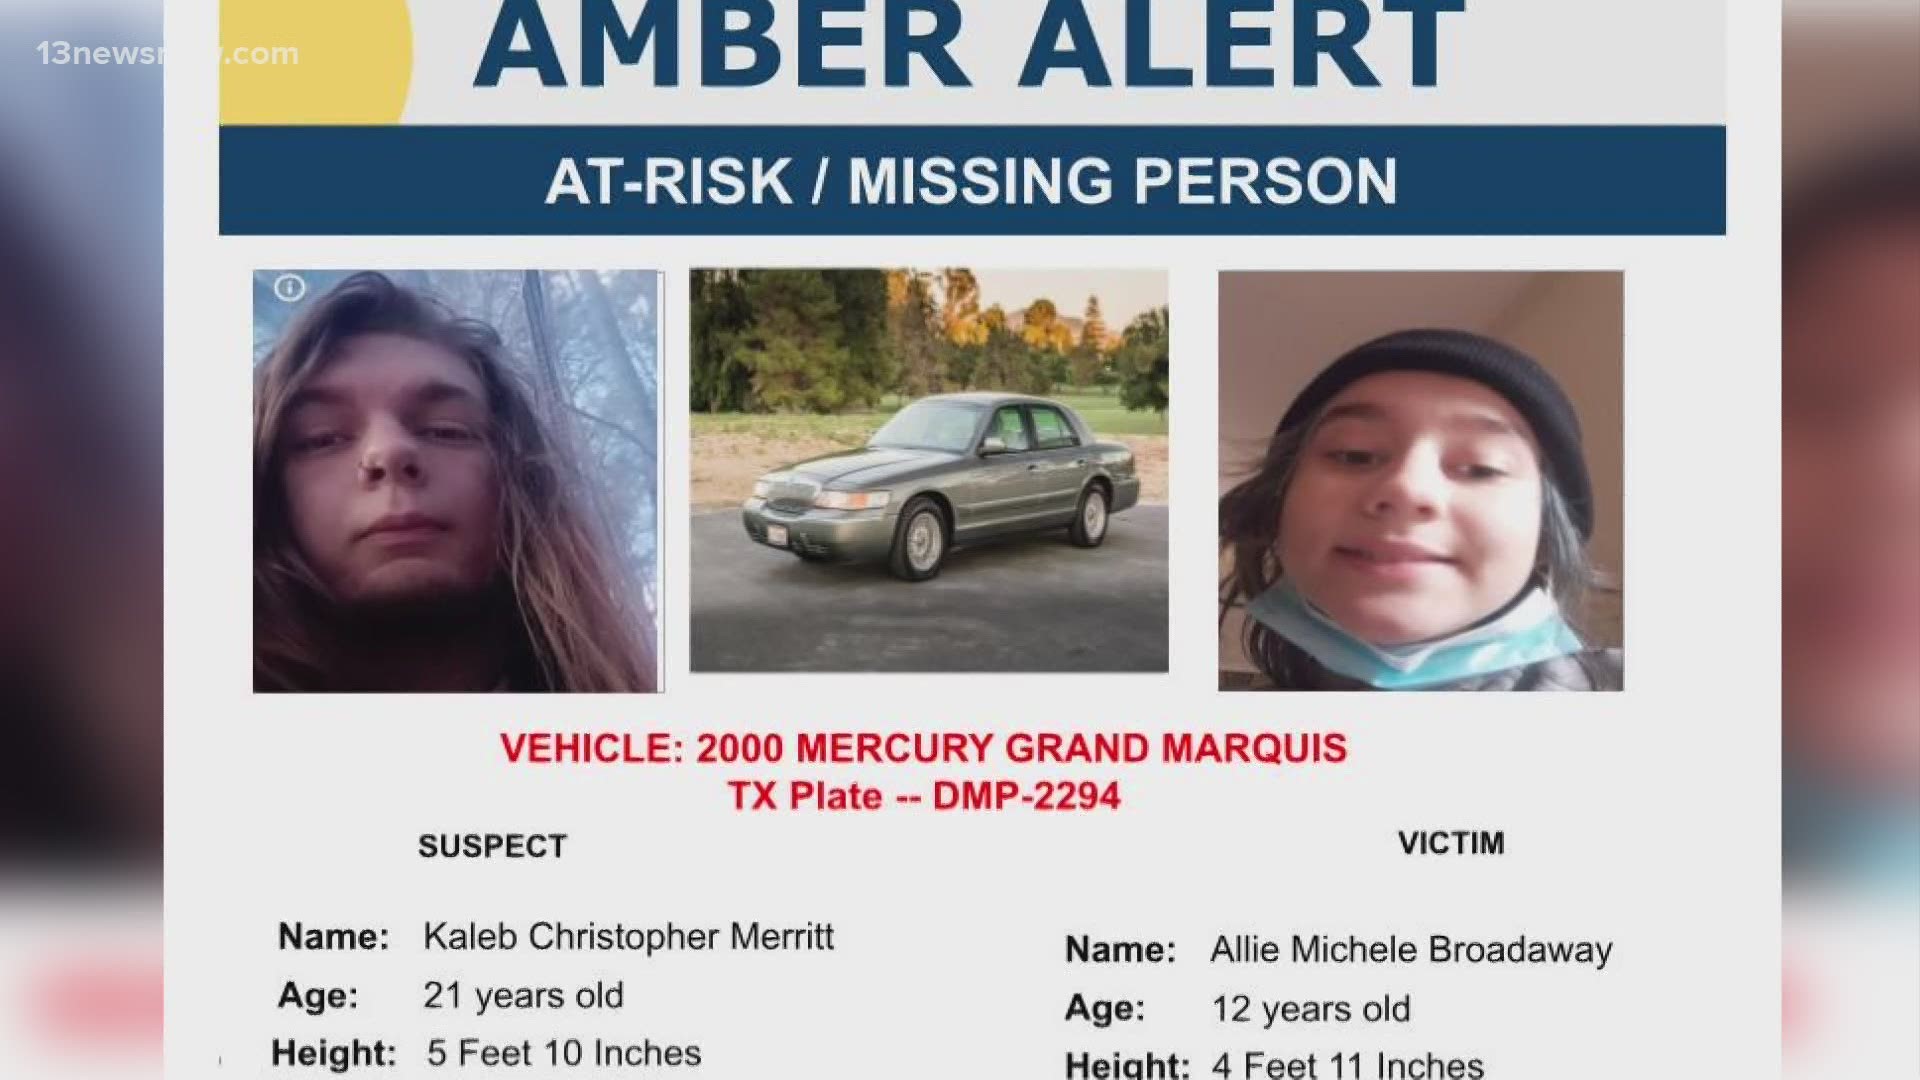 An AMBER Alert has been issued for a 12-year-old Virginia girl who is believed to have been abducted and is in extreme danger.